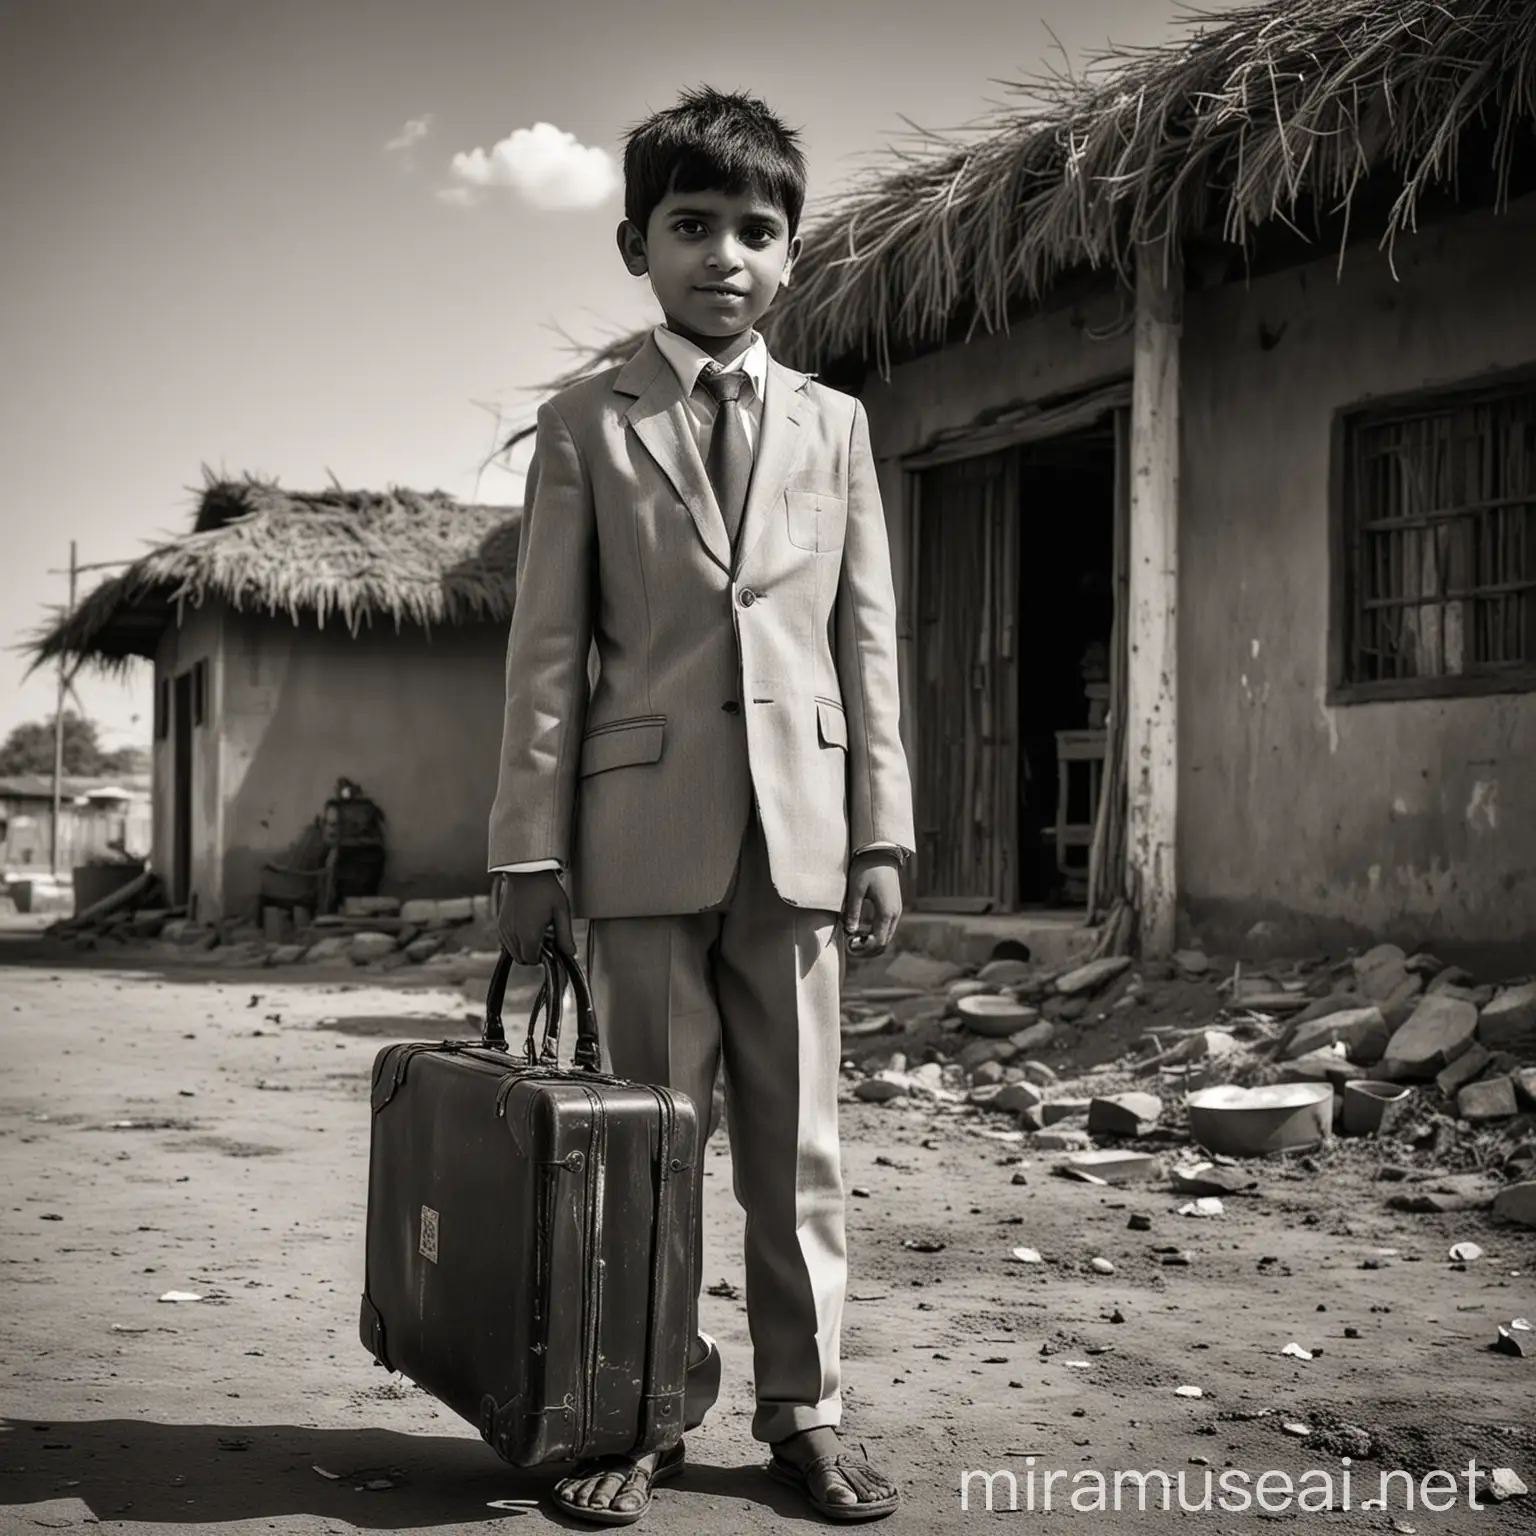 From Poverty to Prosperity Inspiring Transformation of a Marwadi Boy